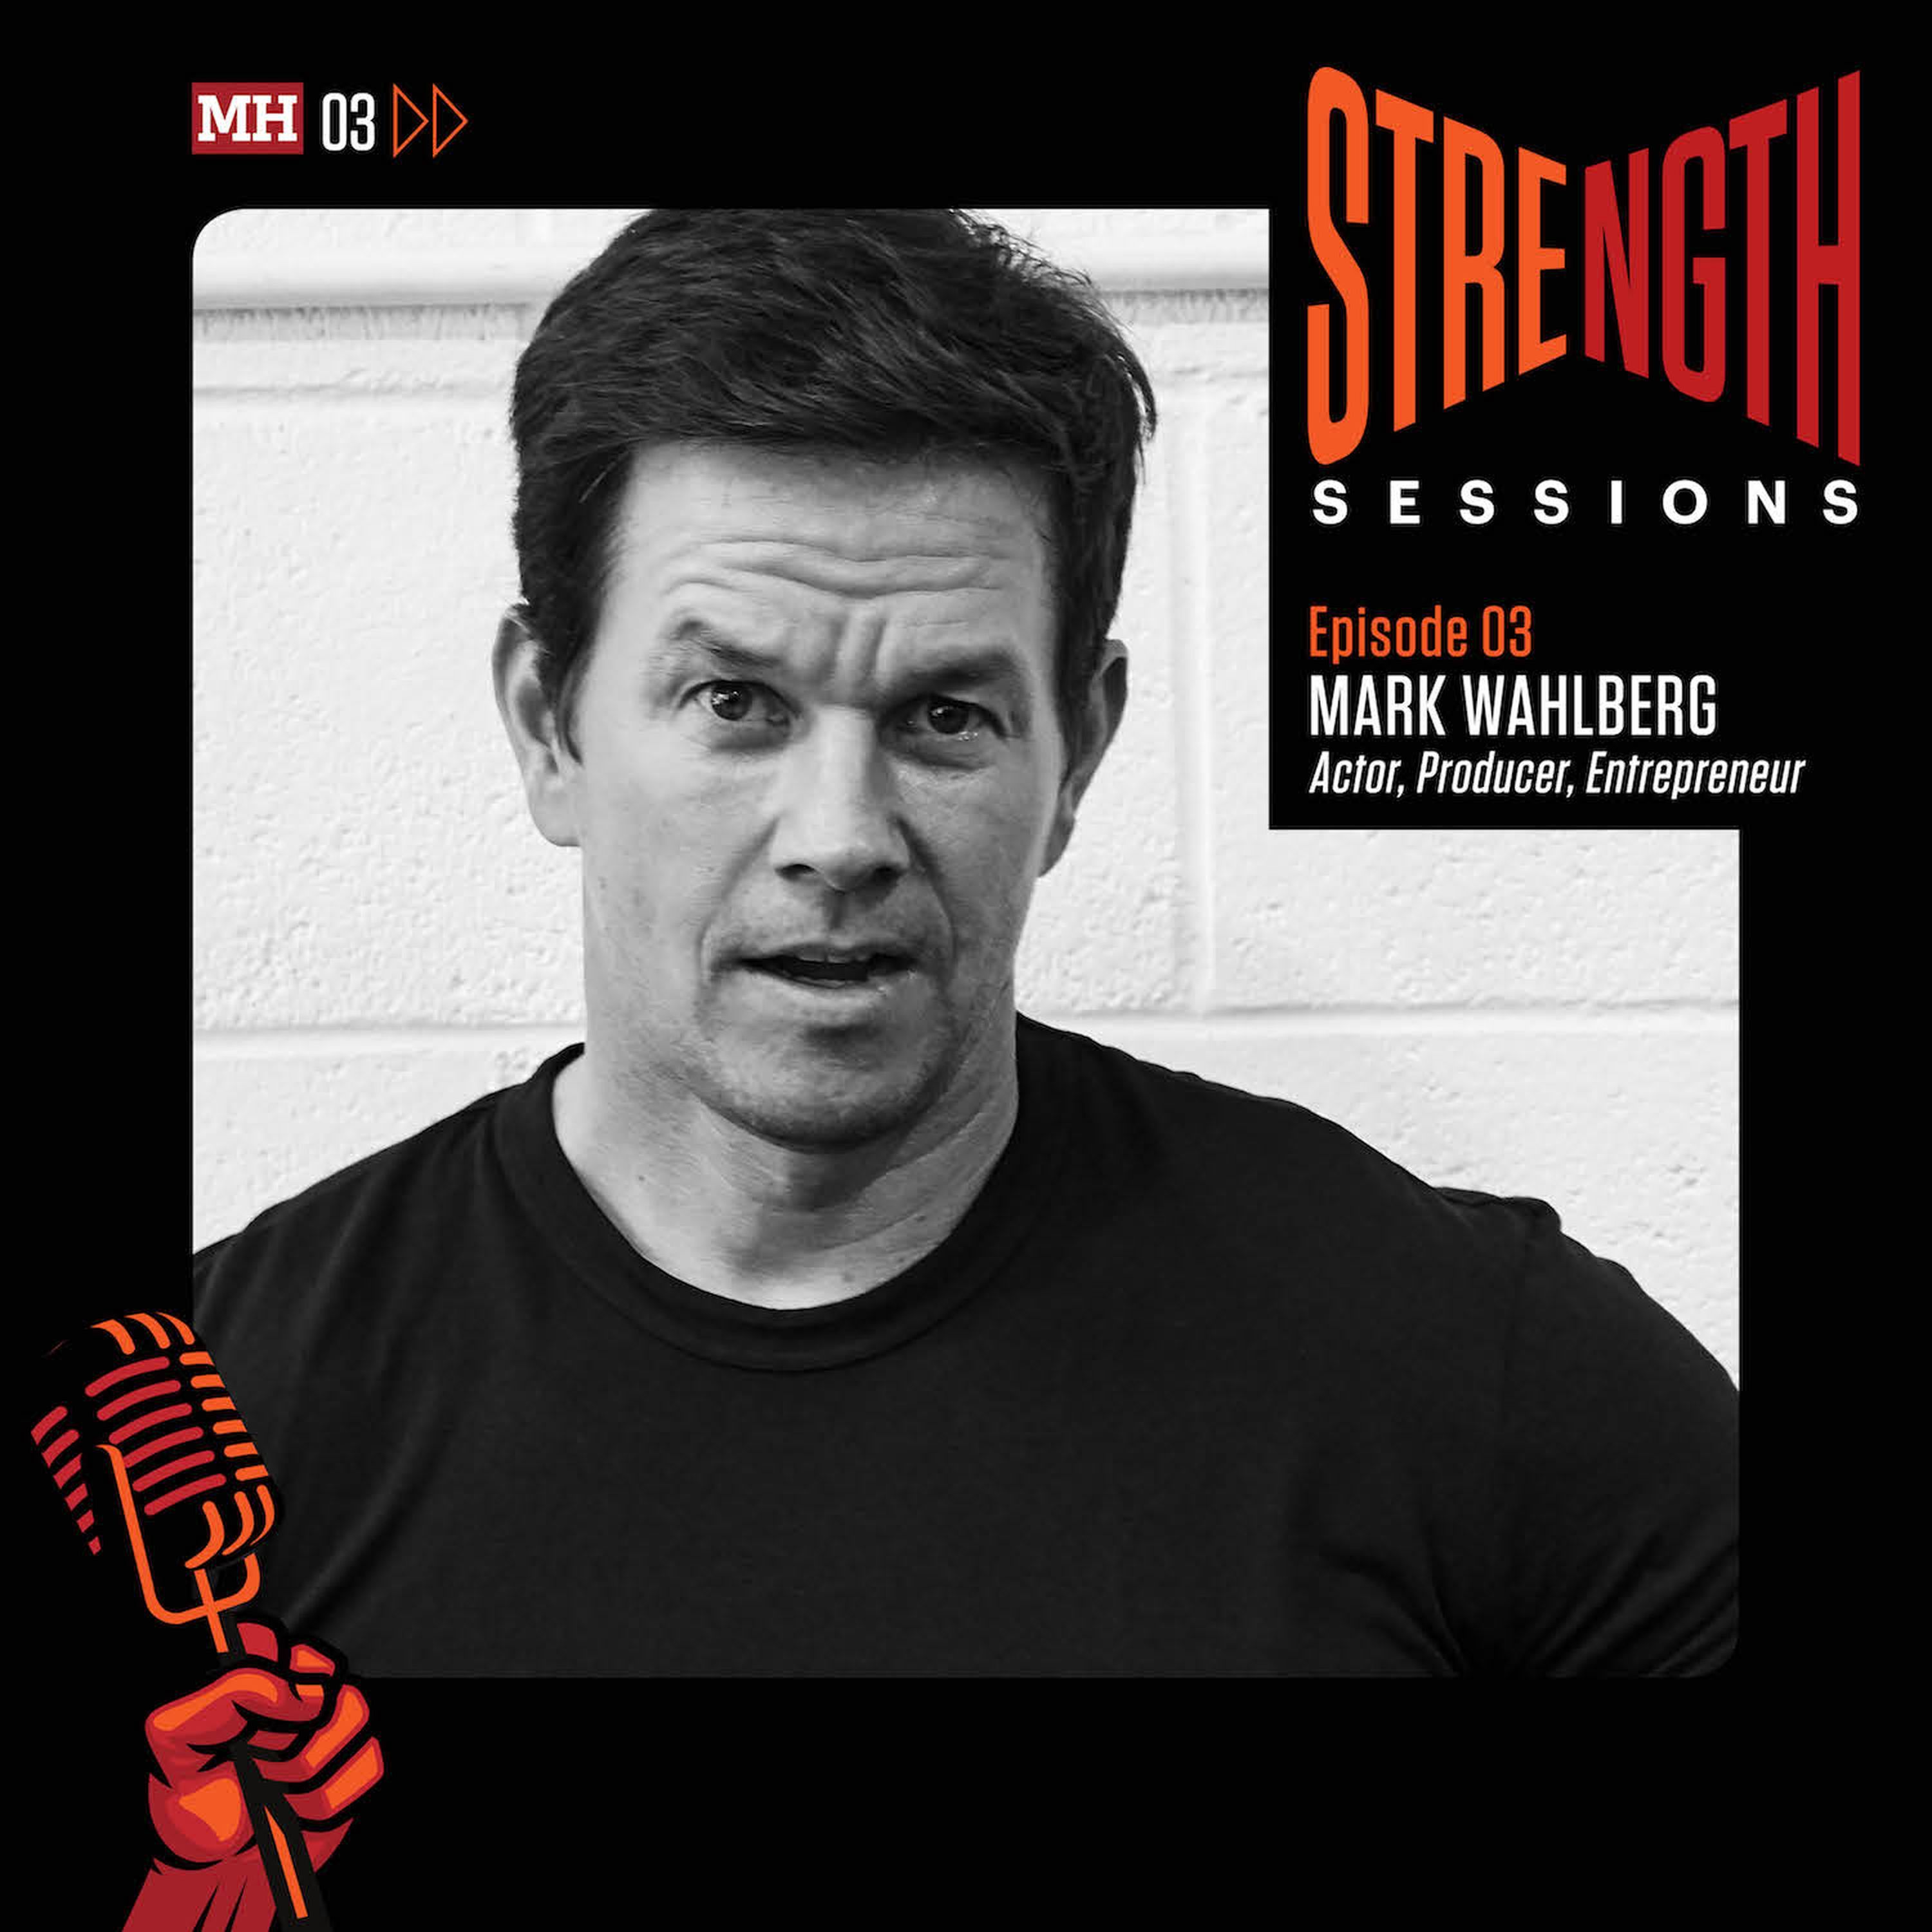 Mark Wahlberg: The dedication needed to be the best